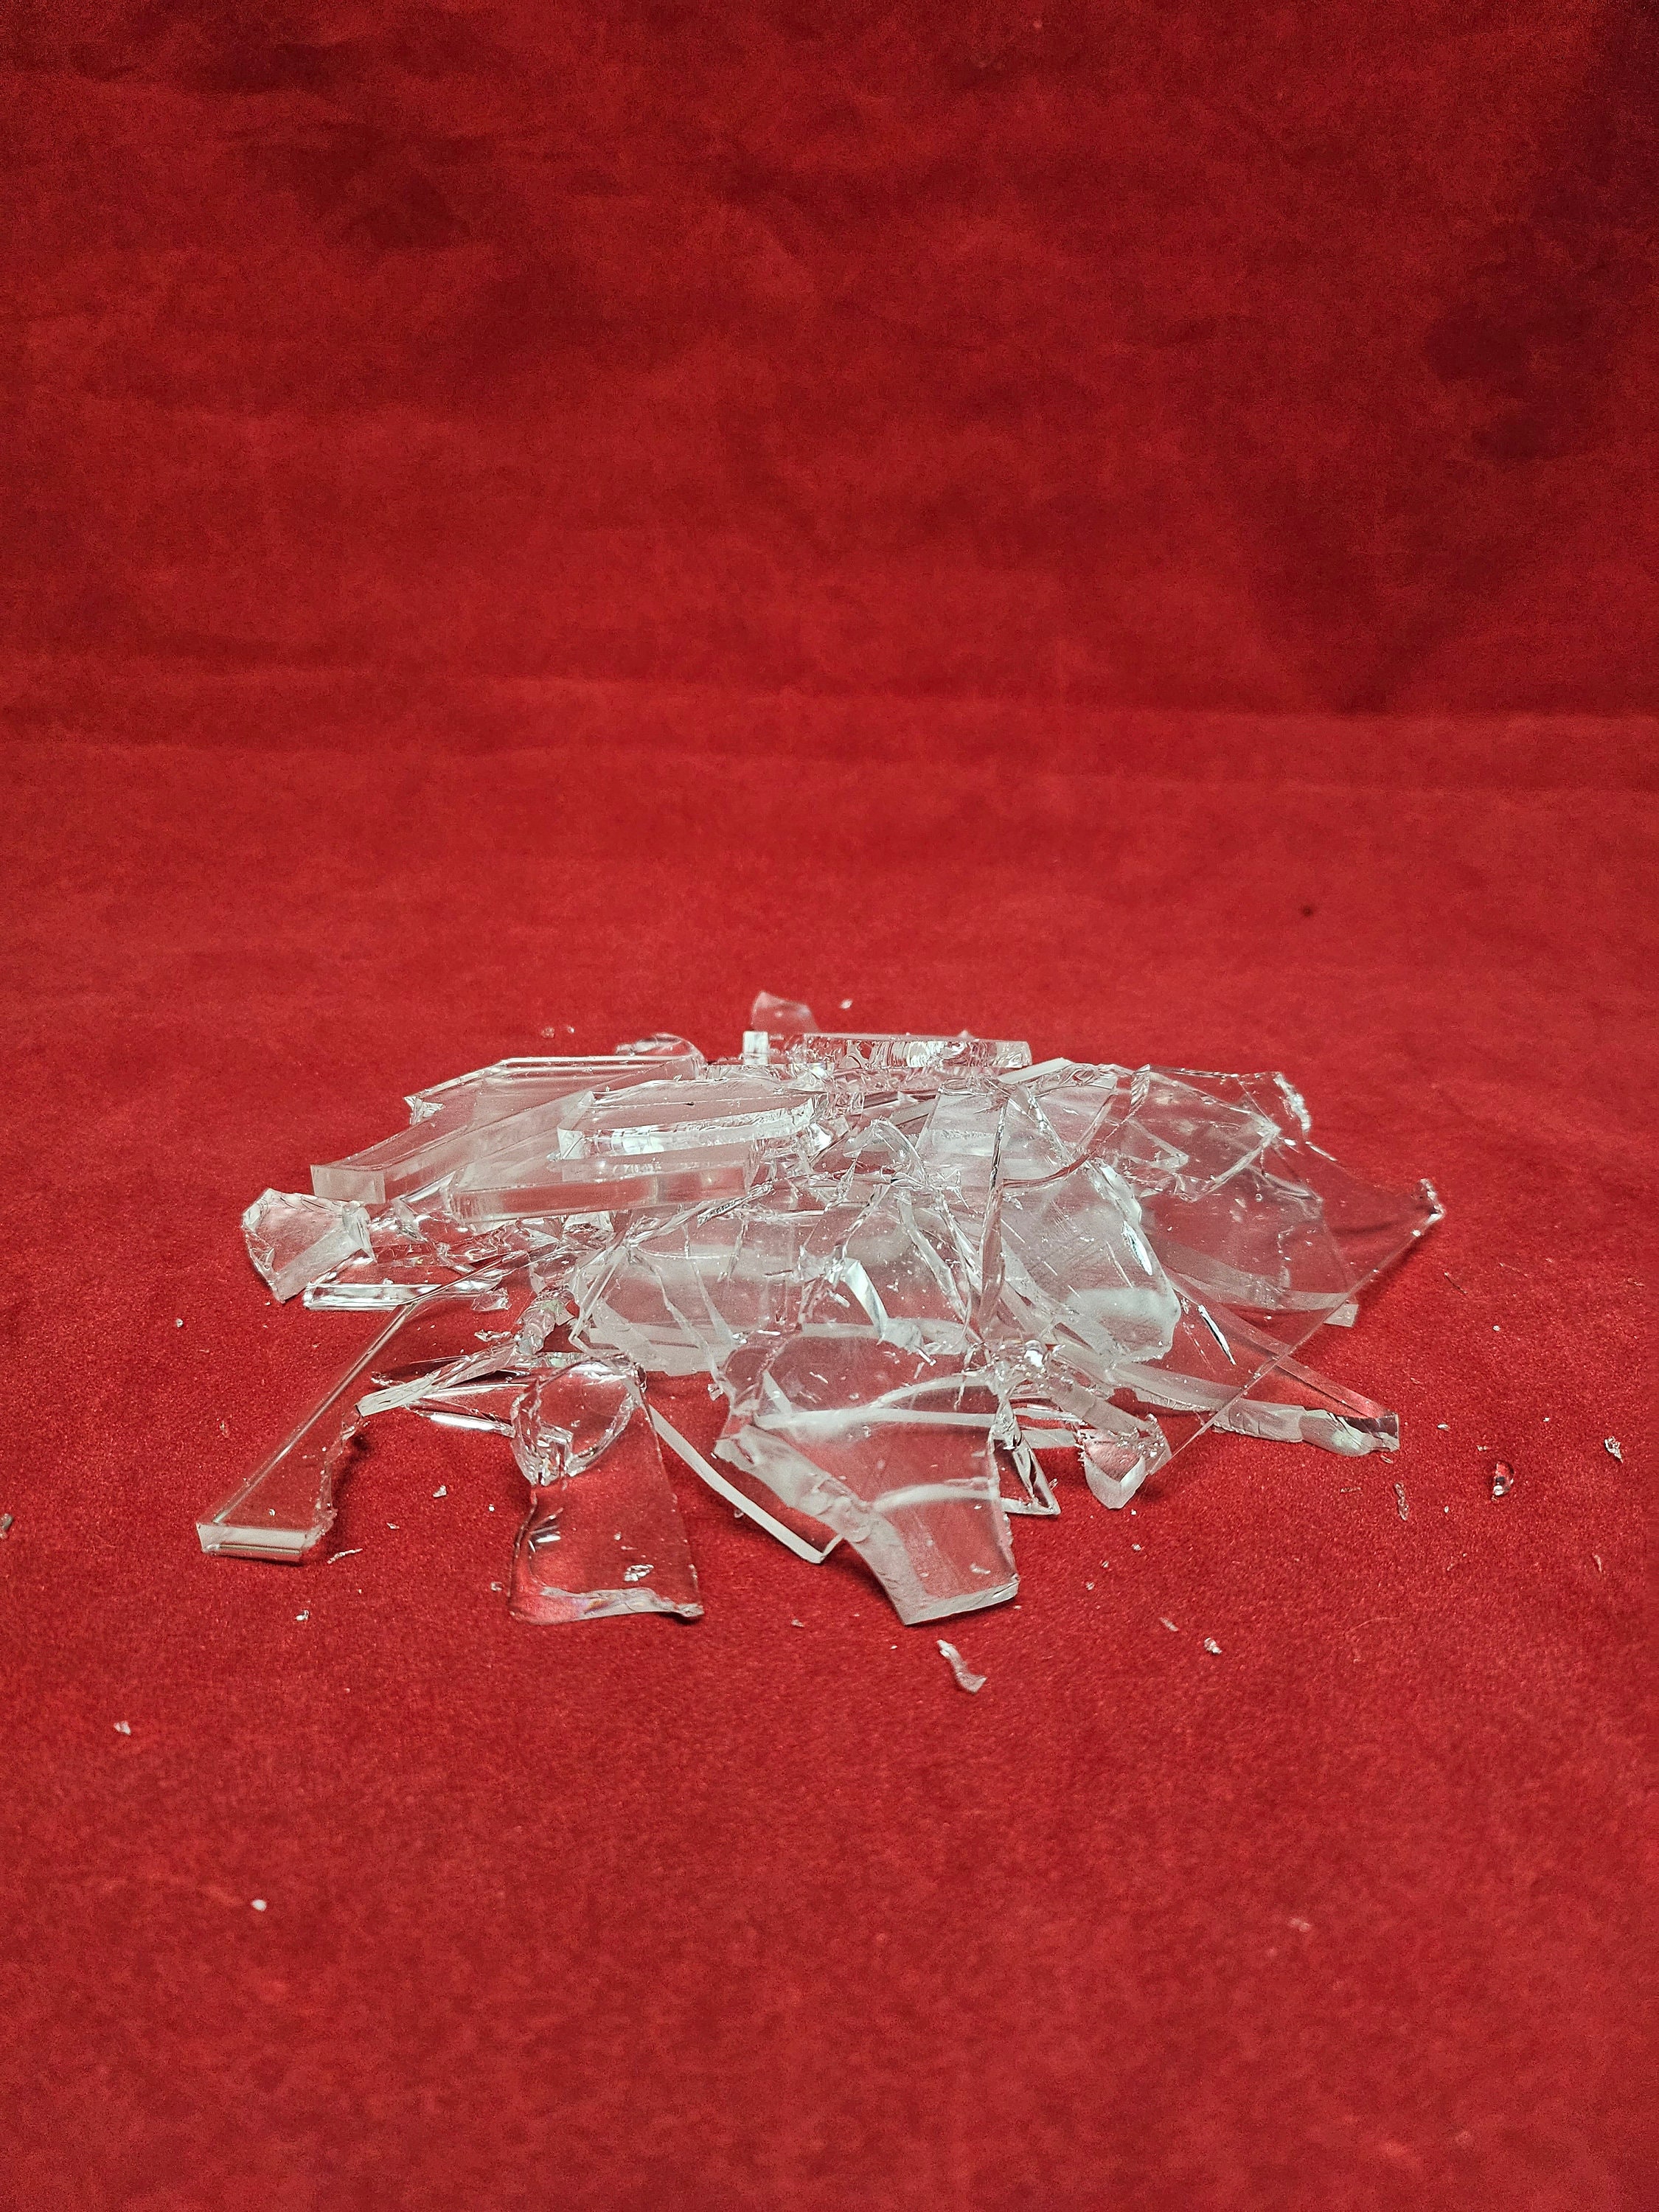 SFX Fake Shattered Rubber Glass. Suitable for Film, Tv or Stage